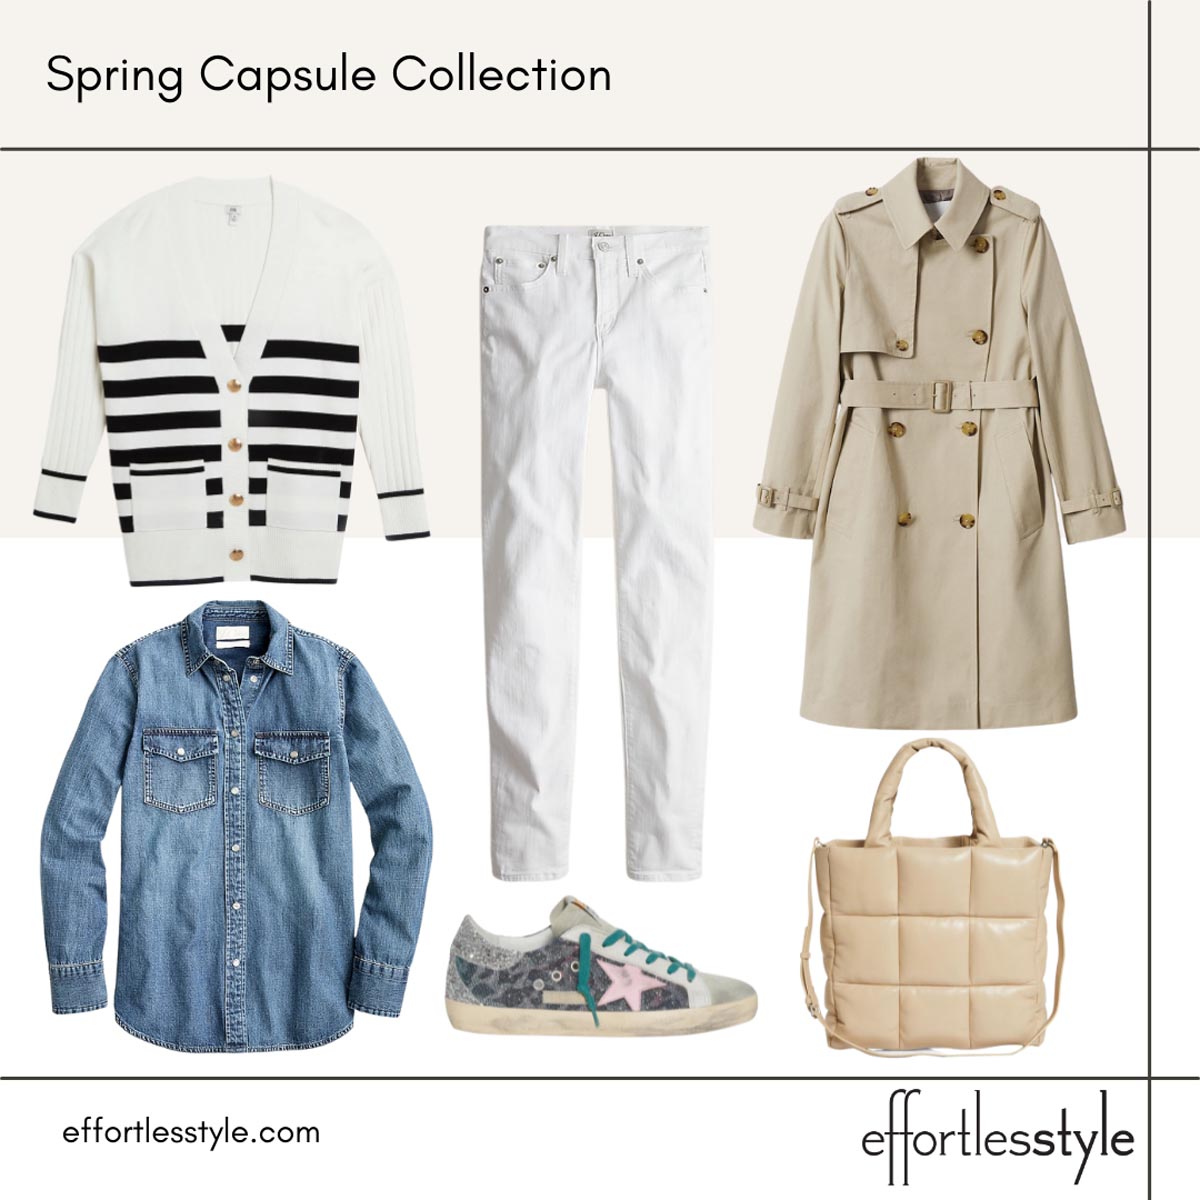 good striped cardigan for spring black and white looks for spring how to mix patterns how to style white jeans in early spring trench coat looks